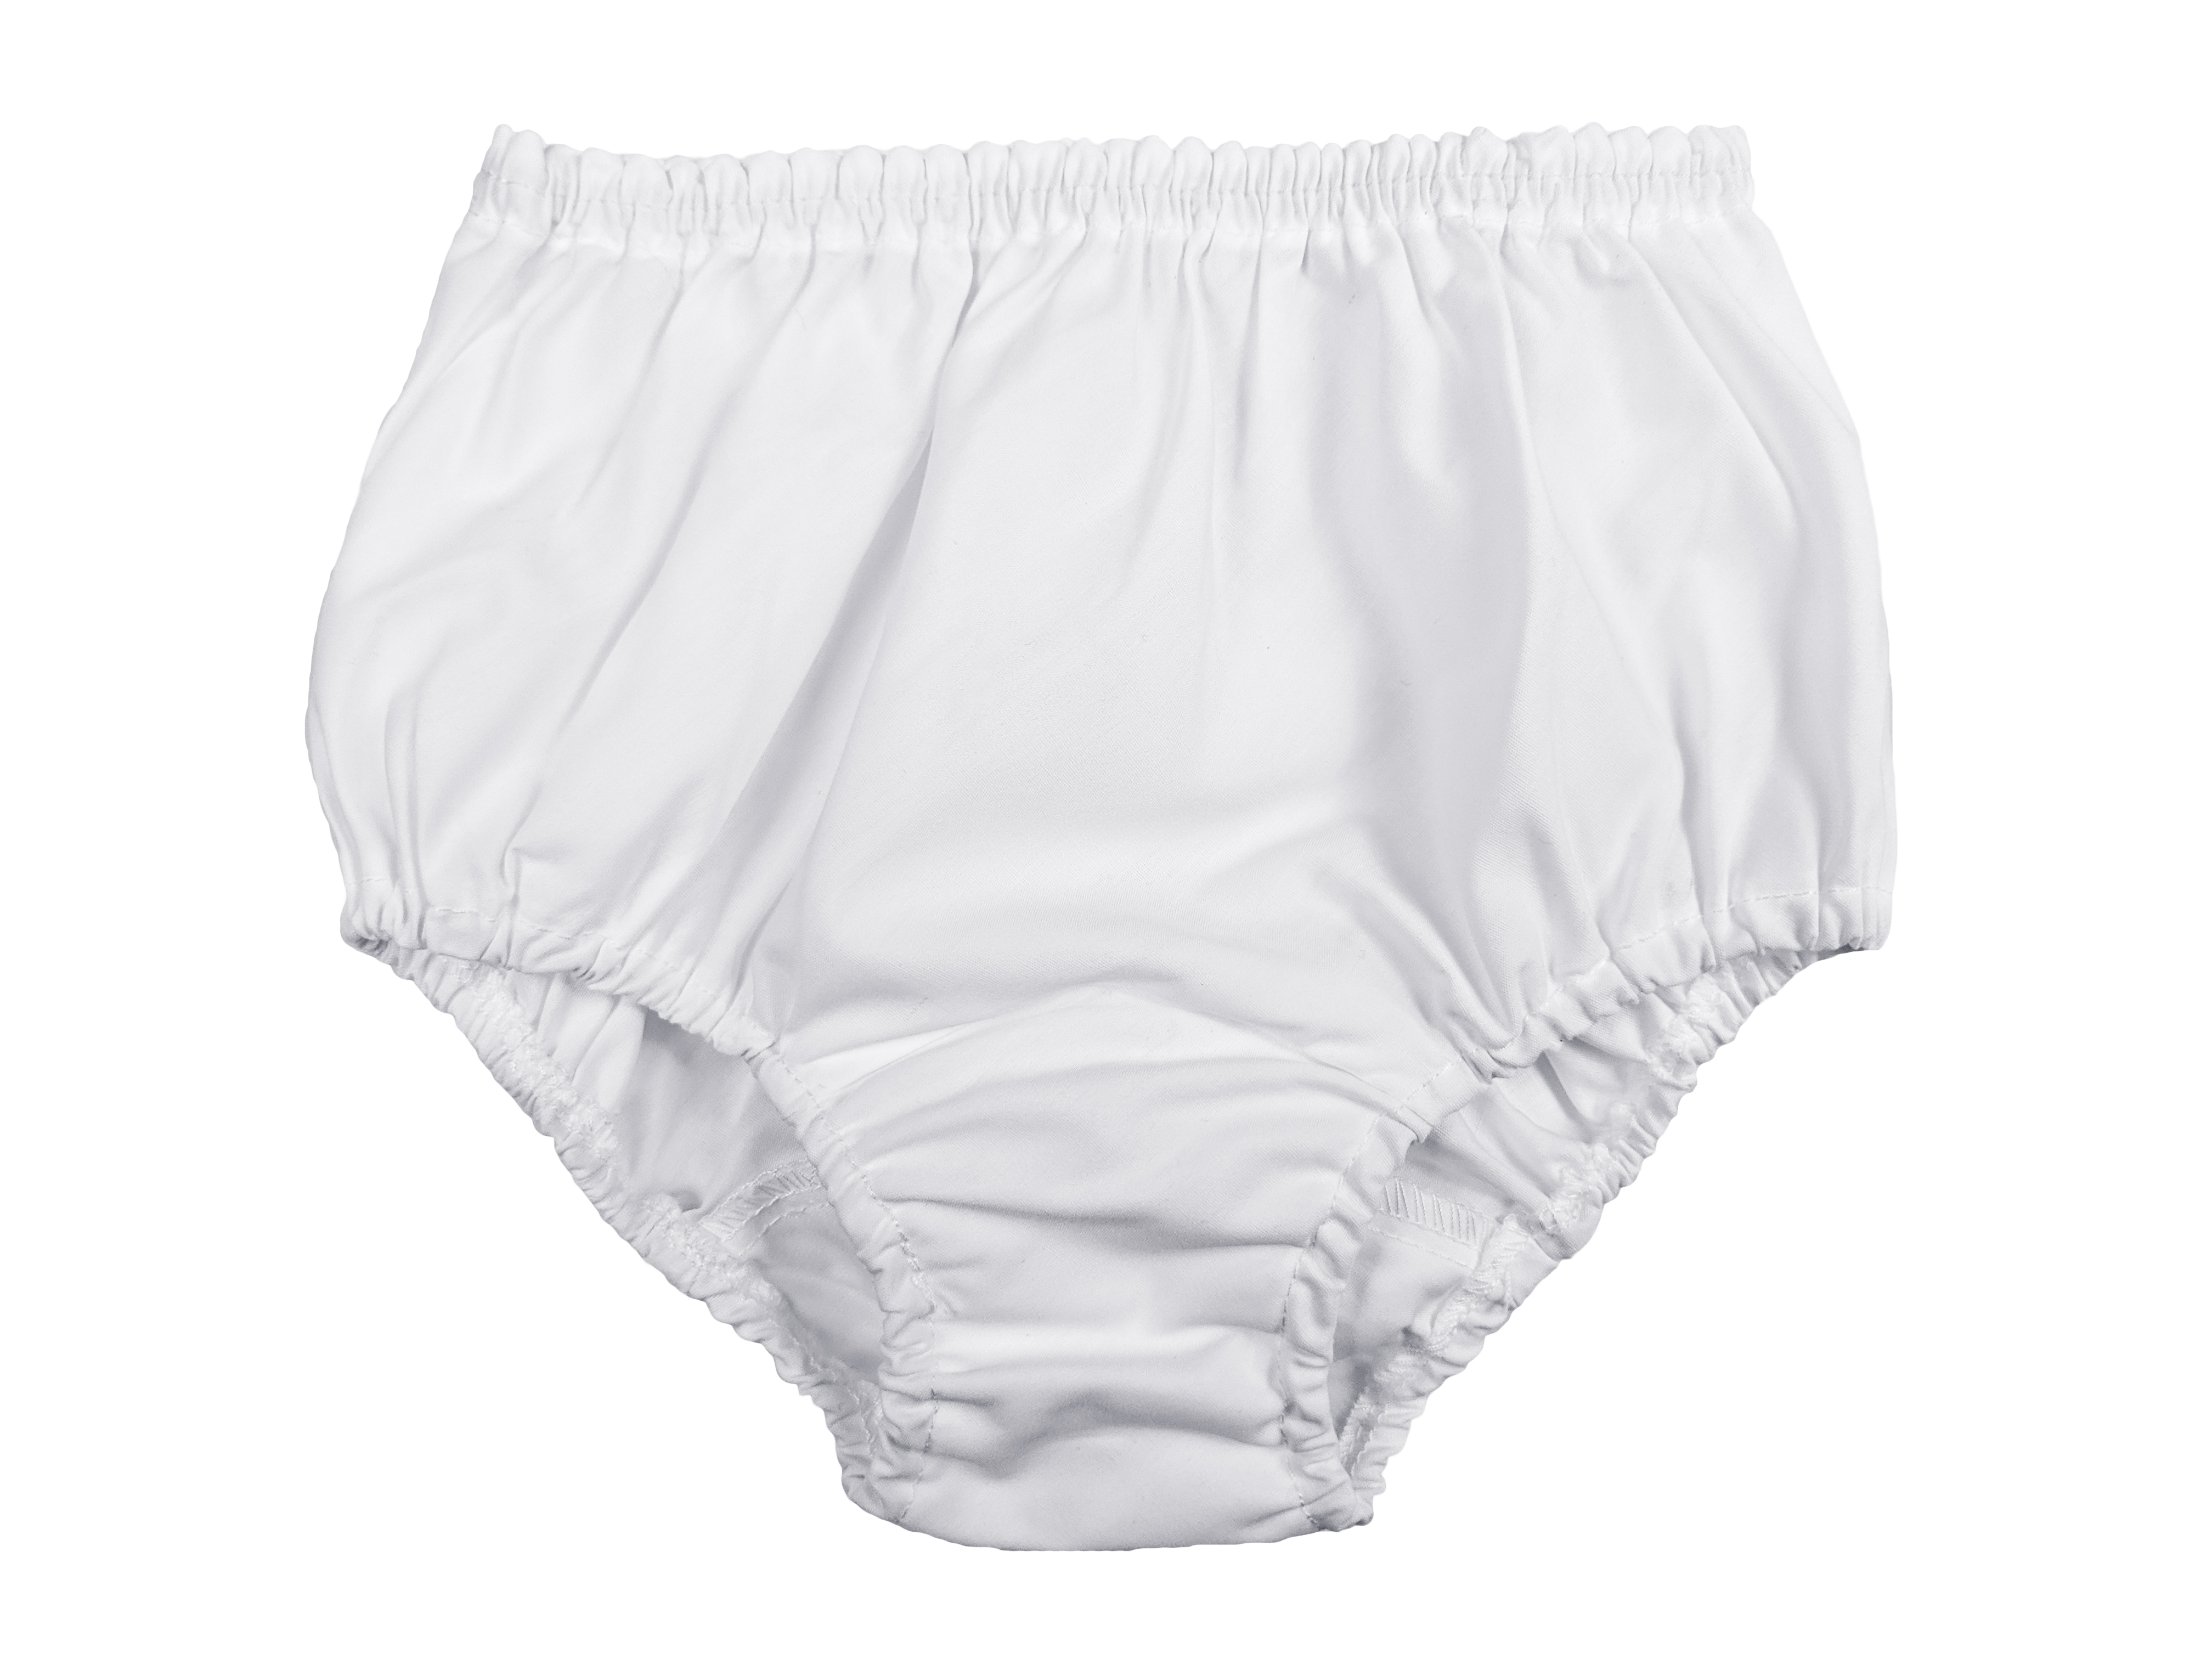 Baby Girls White Elastic Bloomer Diaper Cover - Little Things Mean a Lot